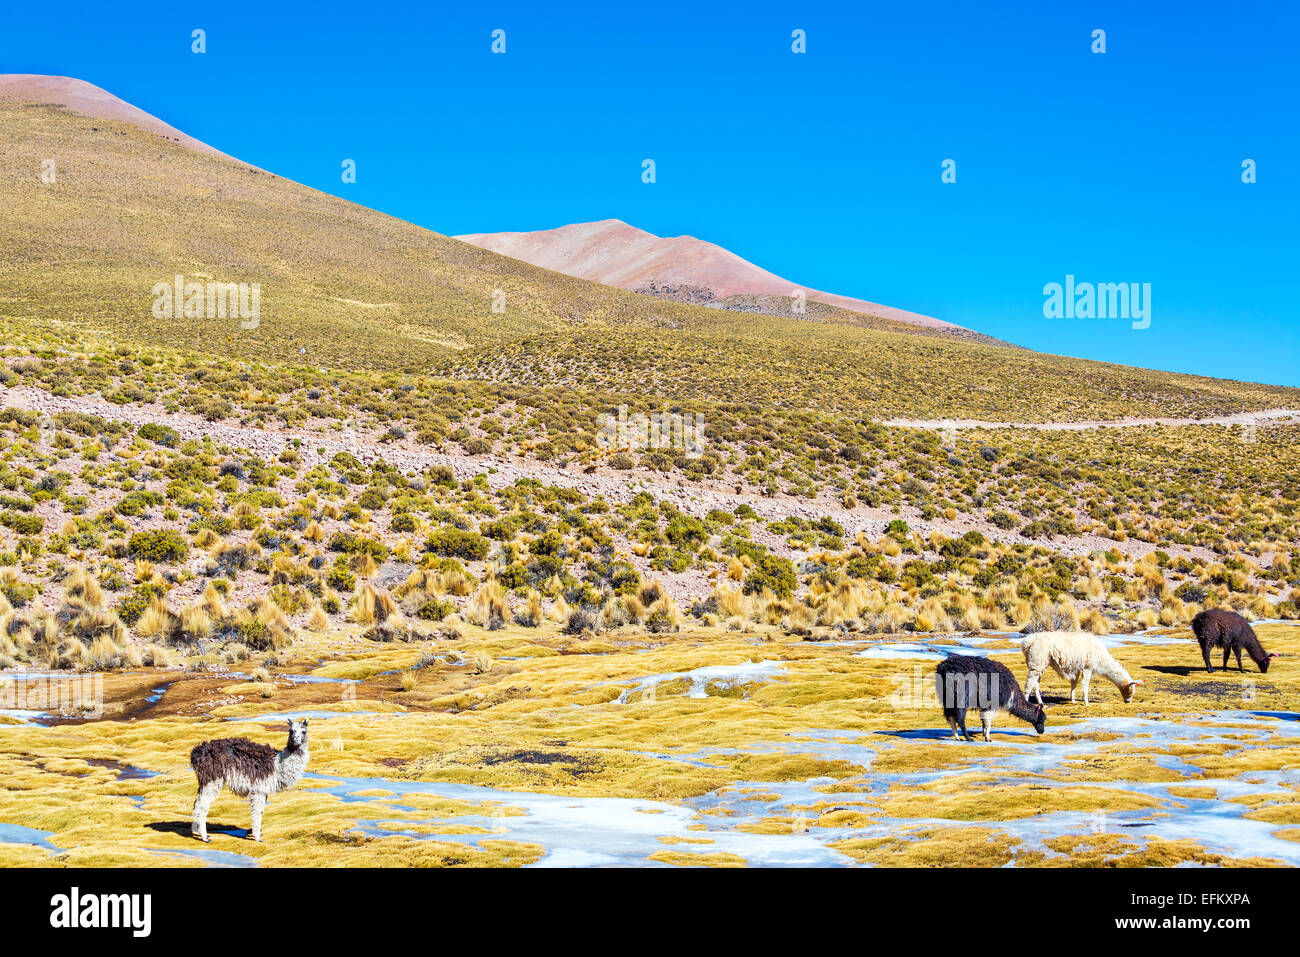 Andean landscape in Bolivia with four llamas in the foreground near Uyuni Stock Photo